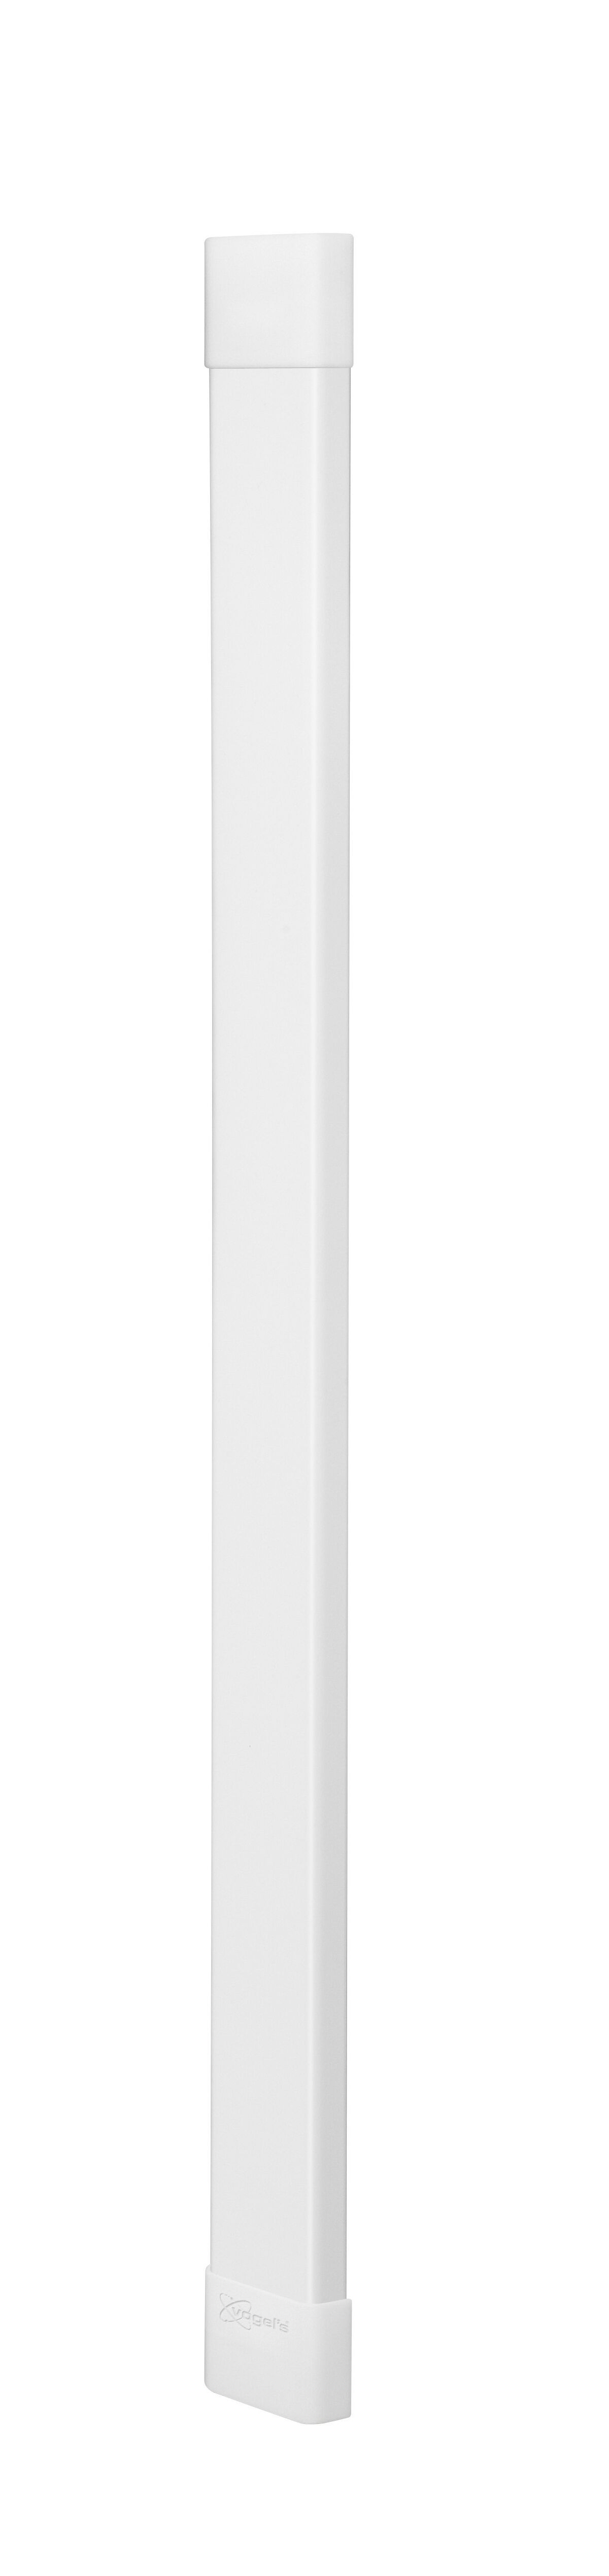 Vogel's CABLE 8 Cable Cover (white) - Max. number of cables to hold: Up to 8 cables - Length: 94 cm - Product